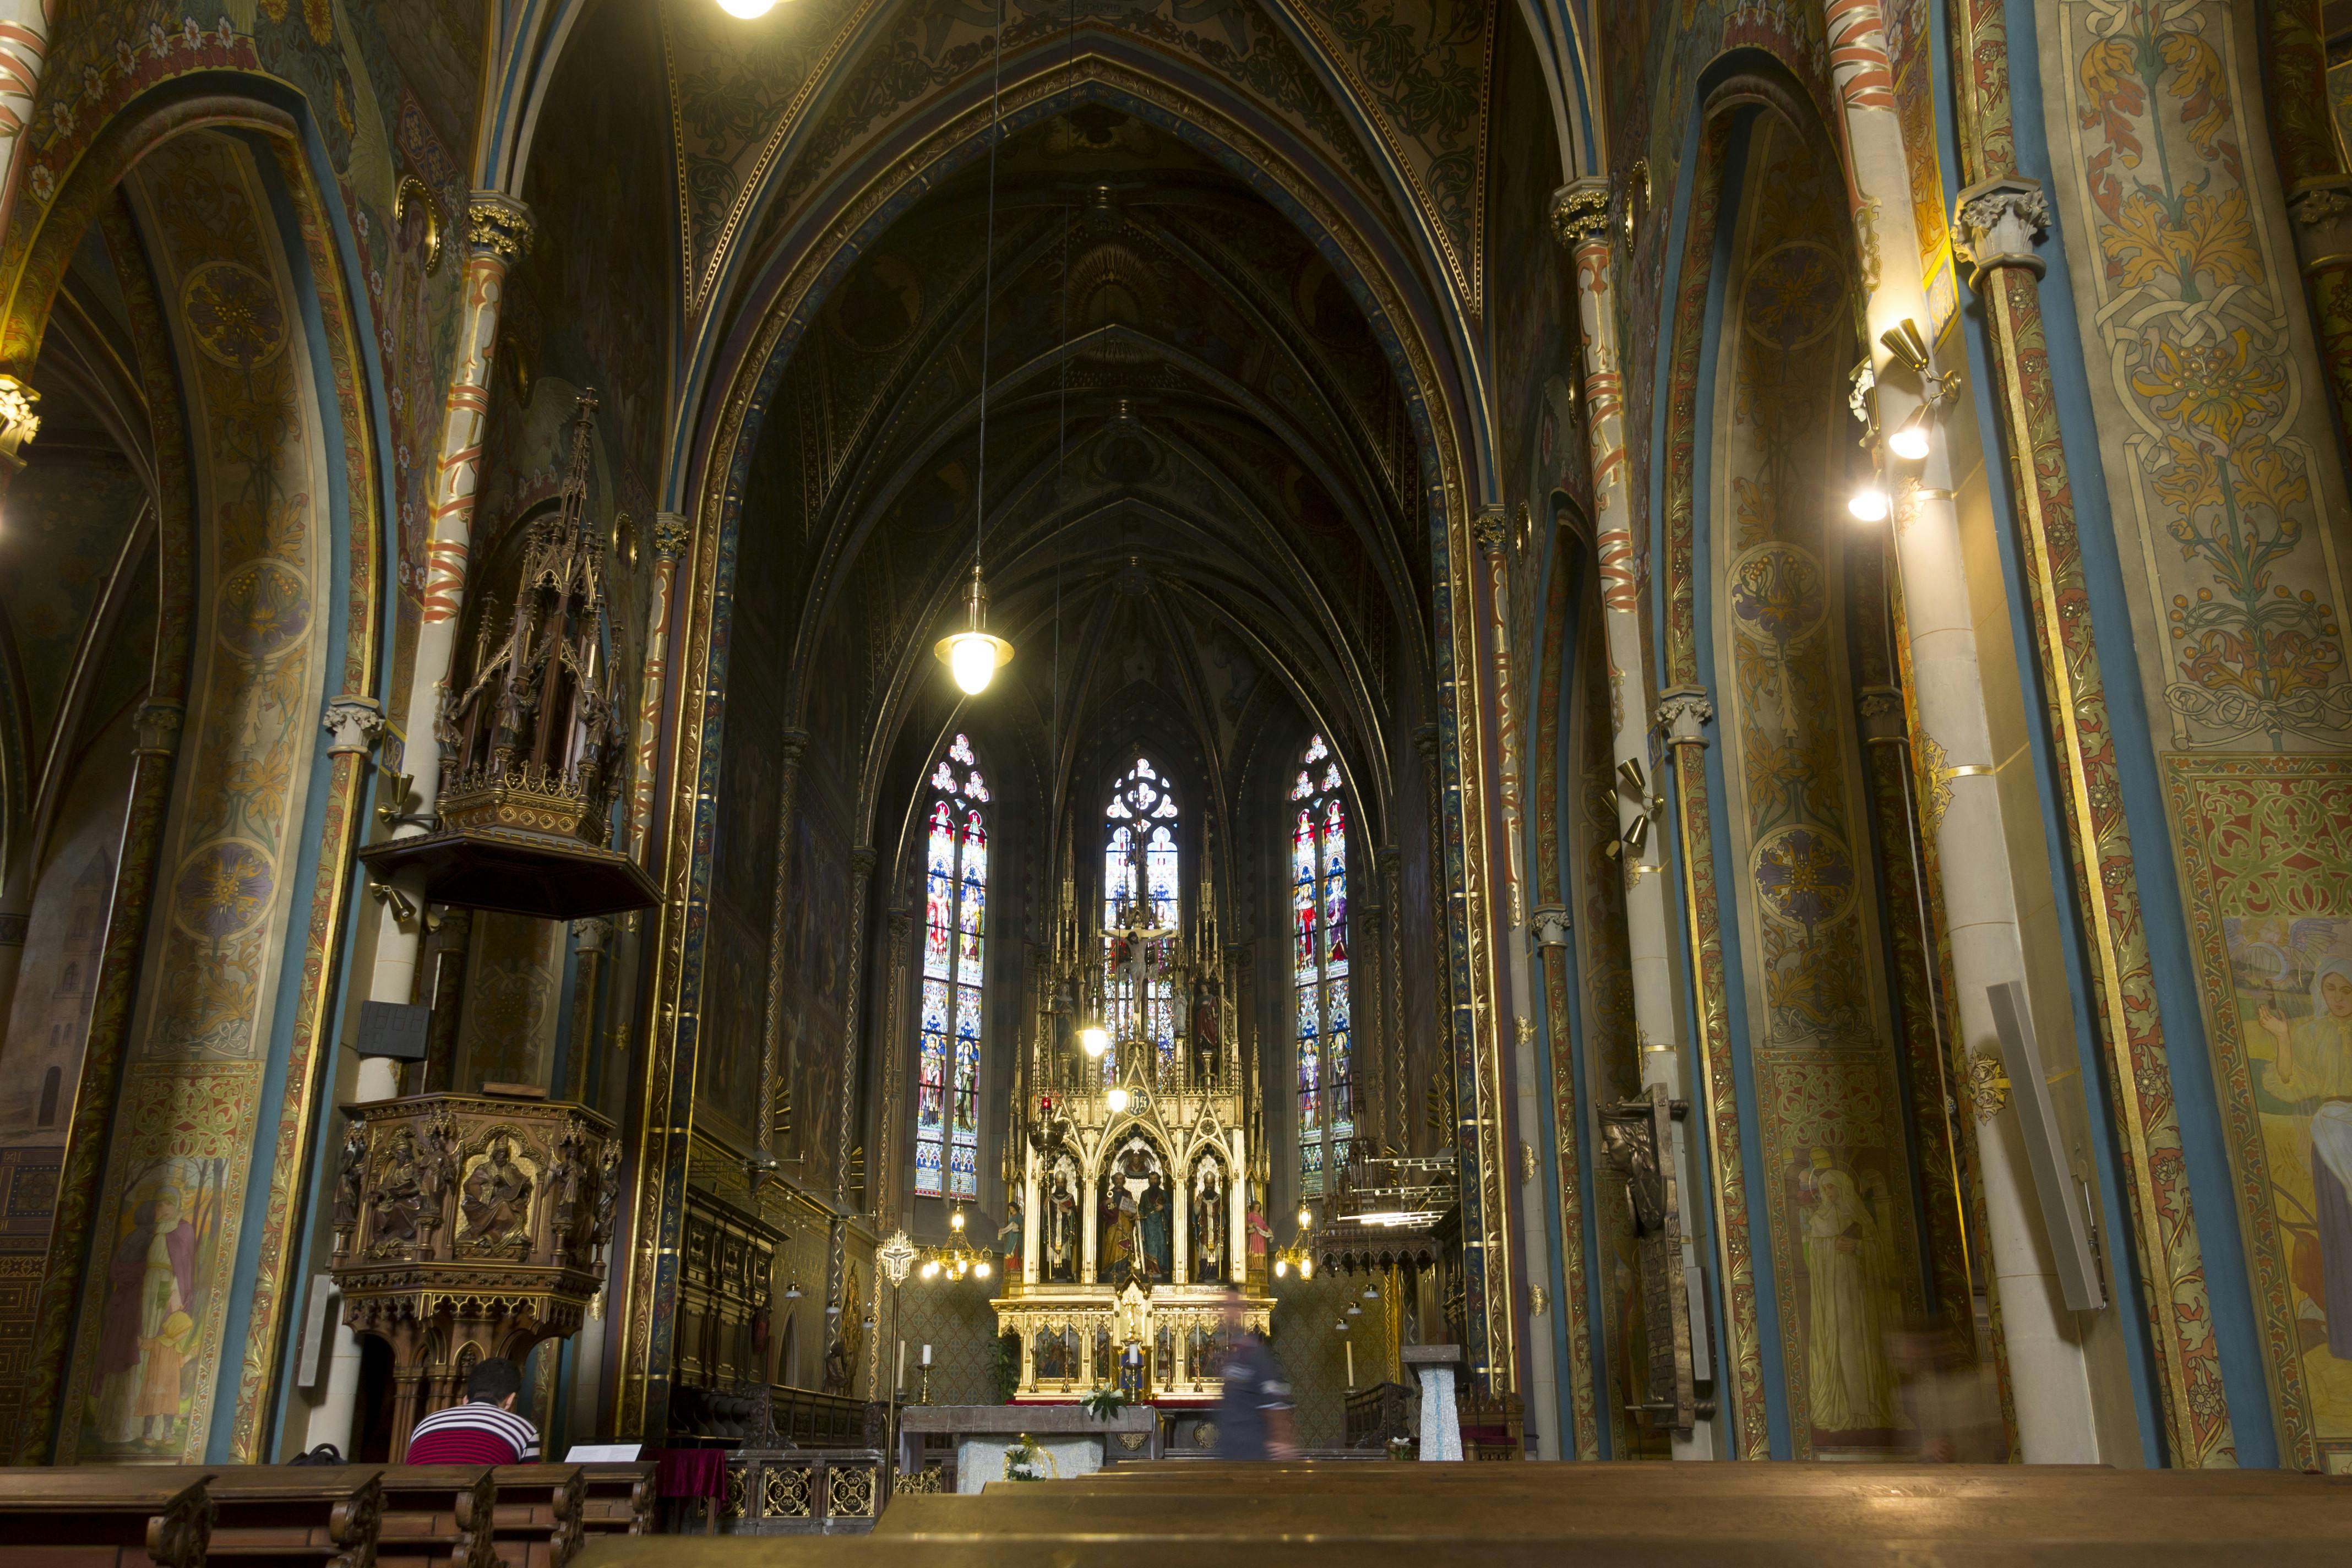 Interior of the Church (Basilica) of St Peter and St Paul at Vysehrad, Prague, Czech republic. The church harbors beautiful detailed decorative painting, a golden altar and beautiful sculptures.jpg